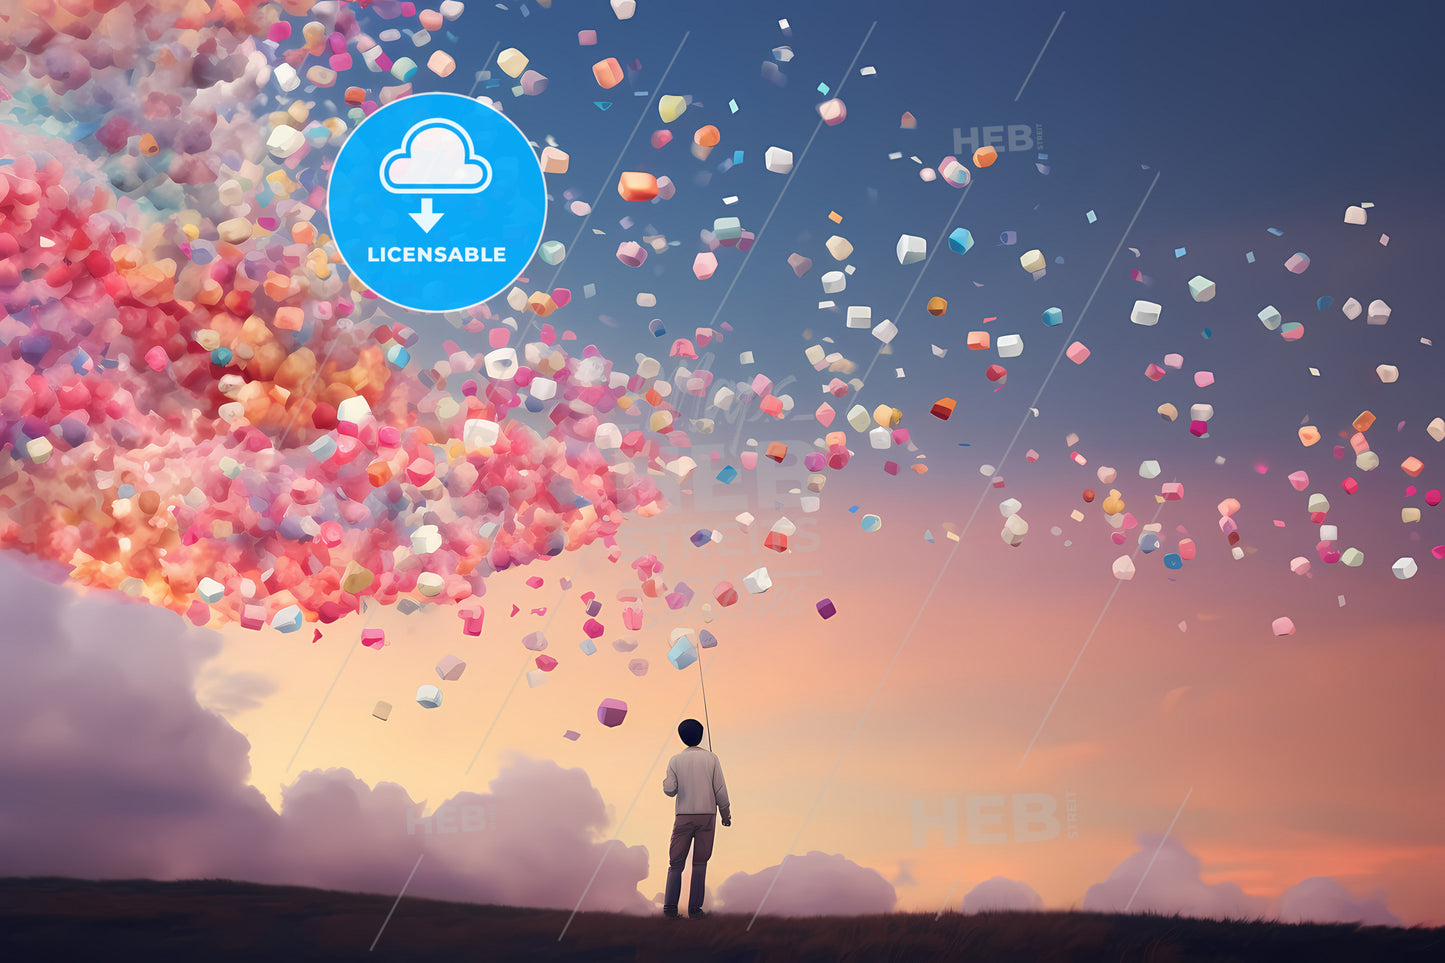 Colorful Clouds Are Seen In The Sky, A Person Holding A Balloon With Many Colorful Objects Floating In The Air